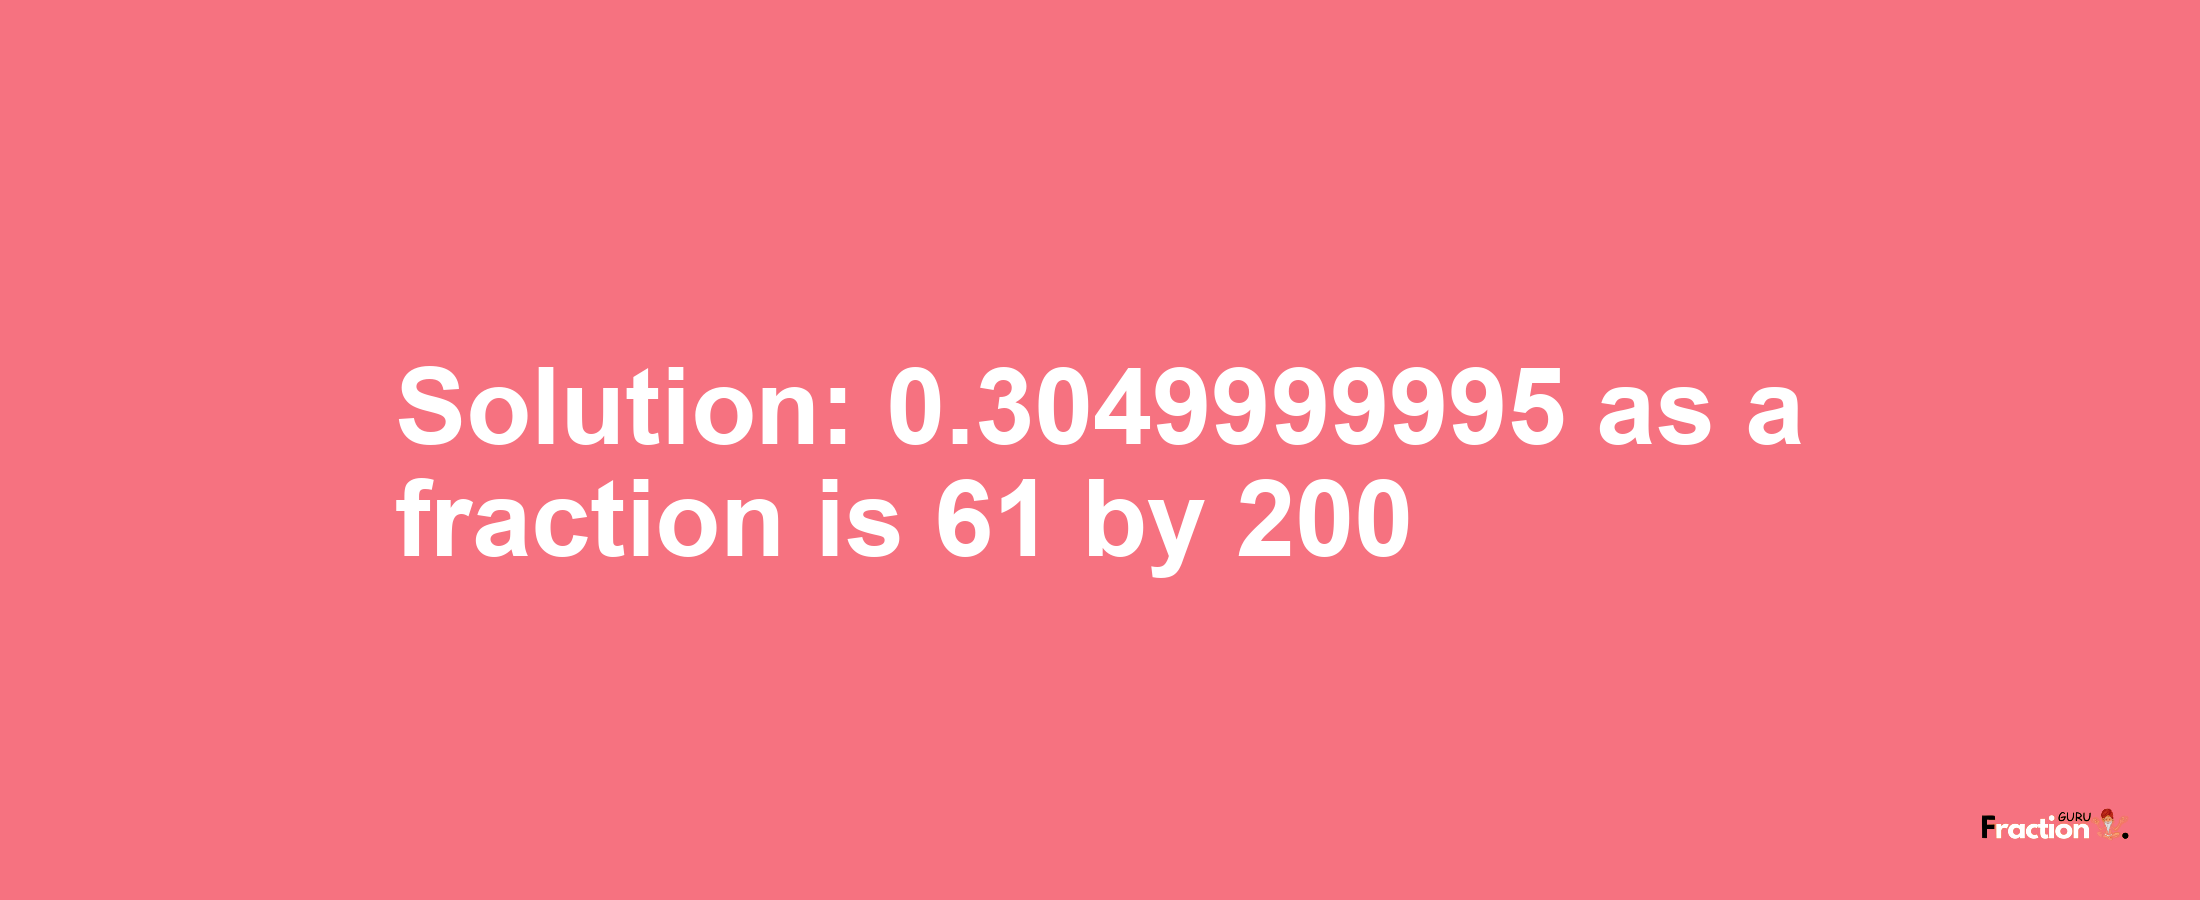 Solution:0.3049999995 as a fraction is 61/200